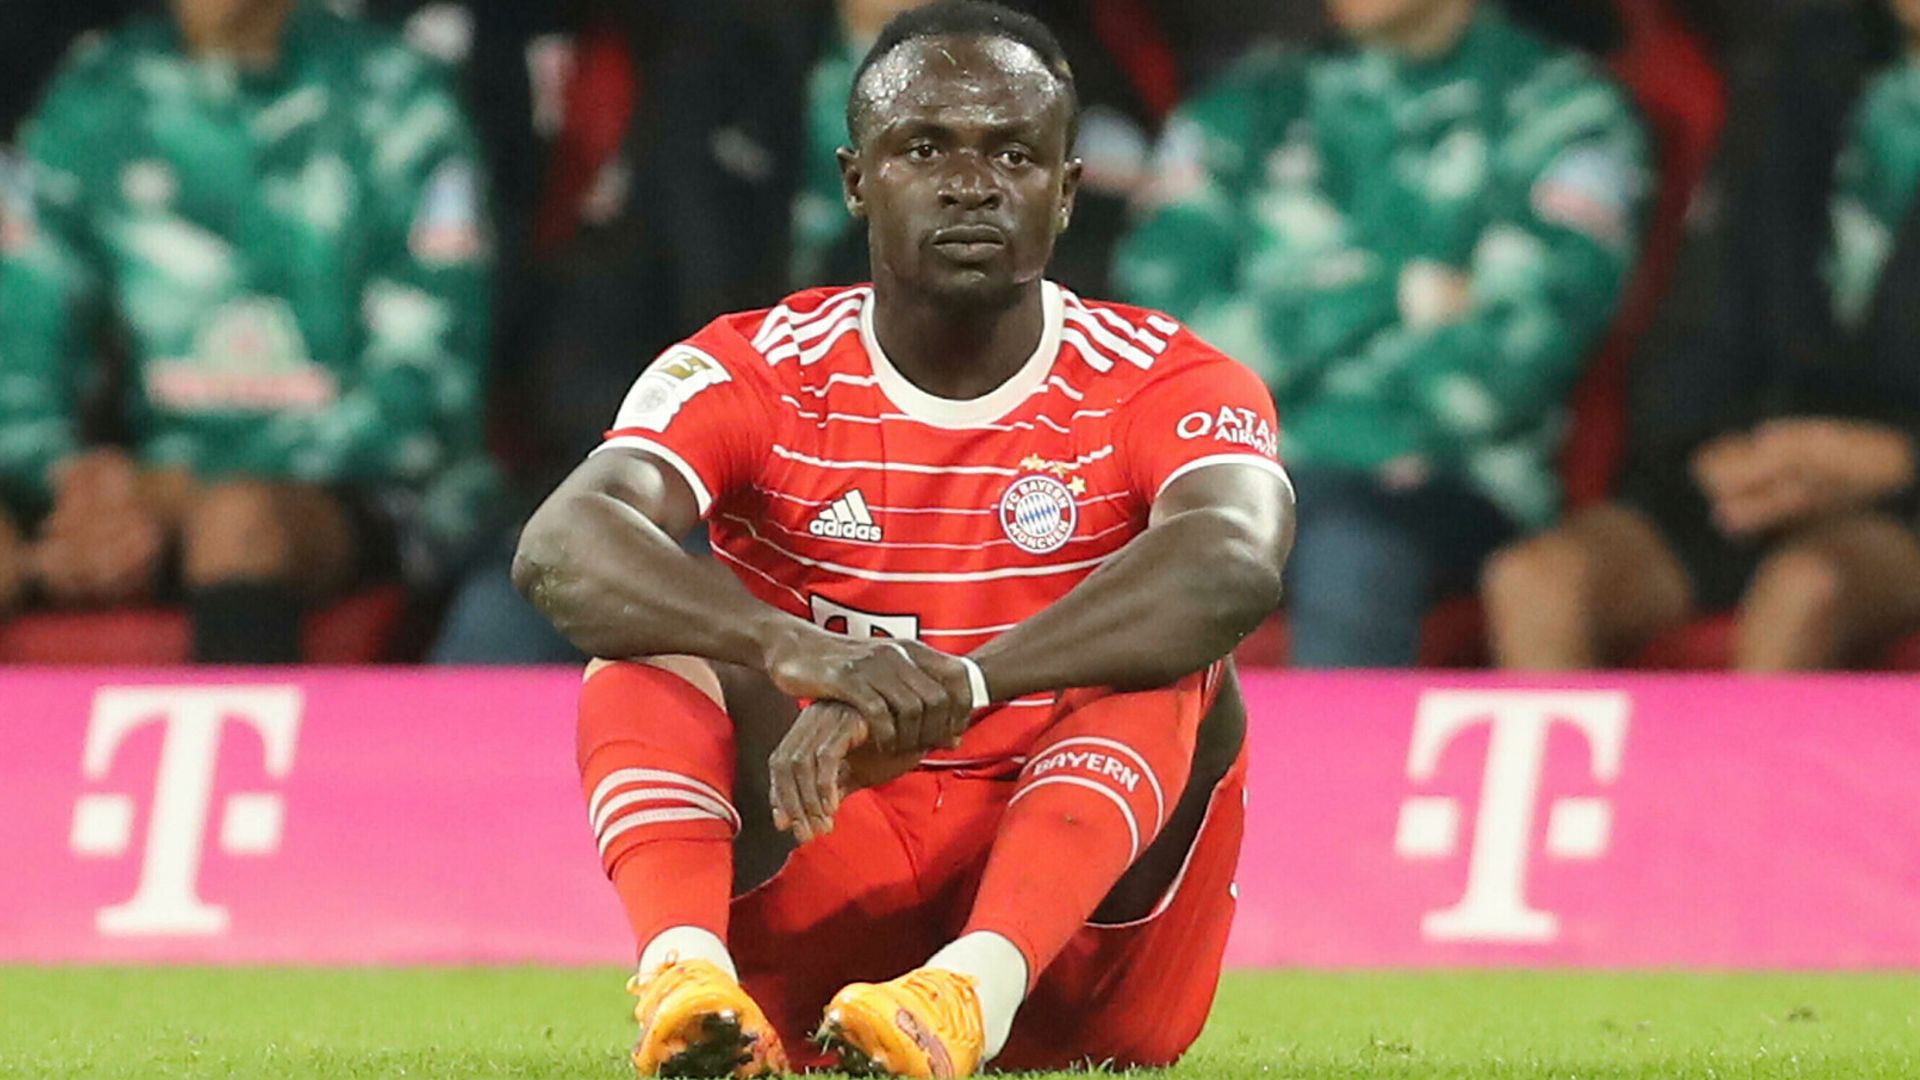 Euro round-up: Mane suffers WC scare | Pique sent off in final game